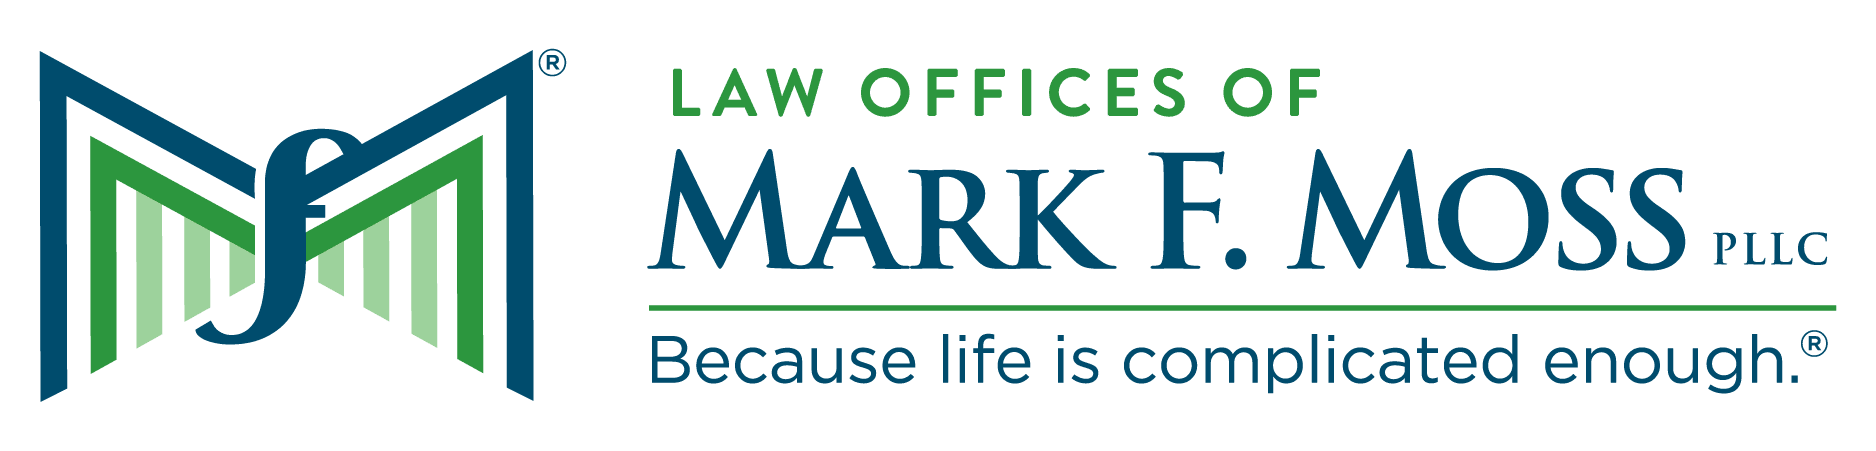 Law Offices of Mark Moss Logo